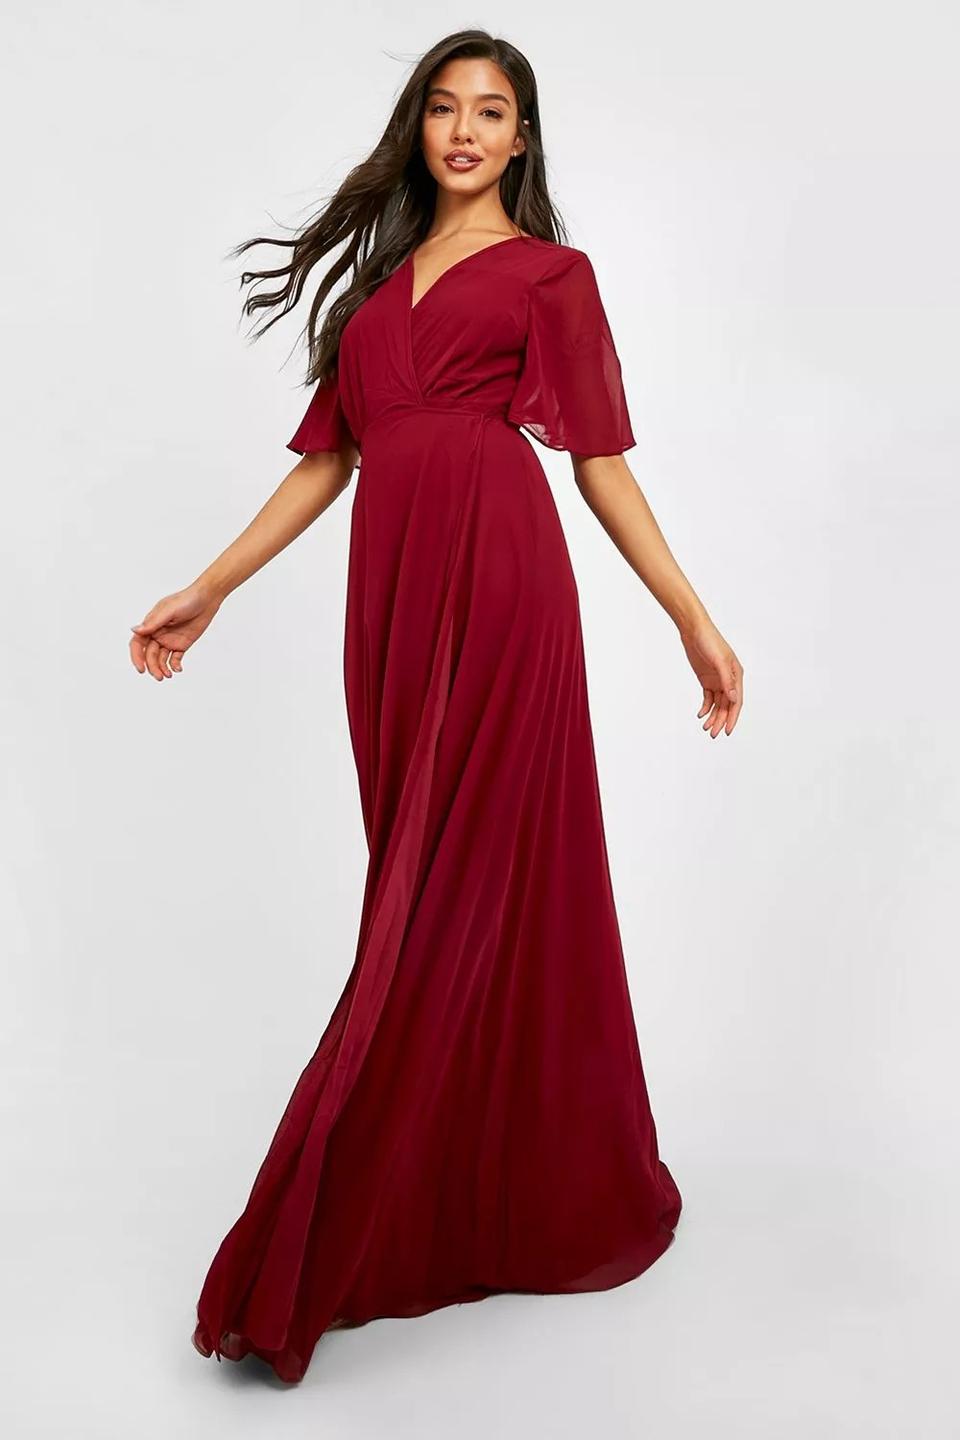 Red Bridesmaid Dresses: 22 Gorgeous Designs From Ruby to Rose - hitched ...